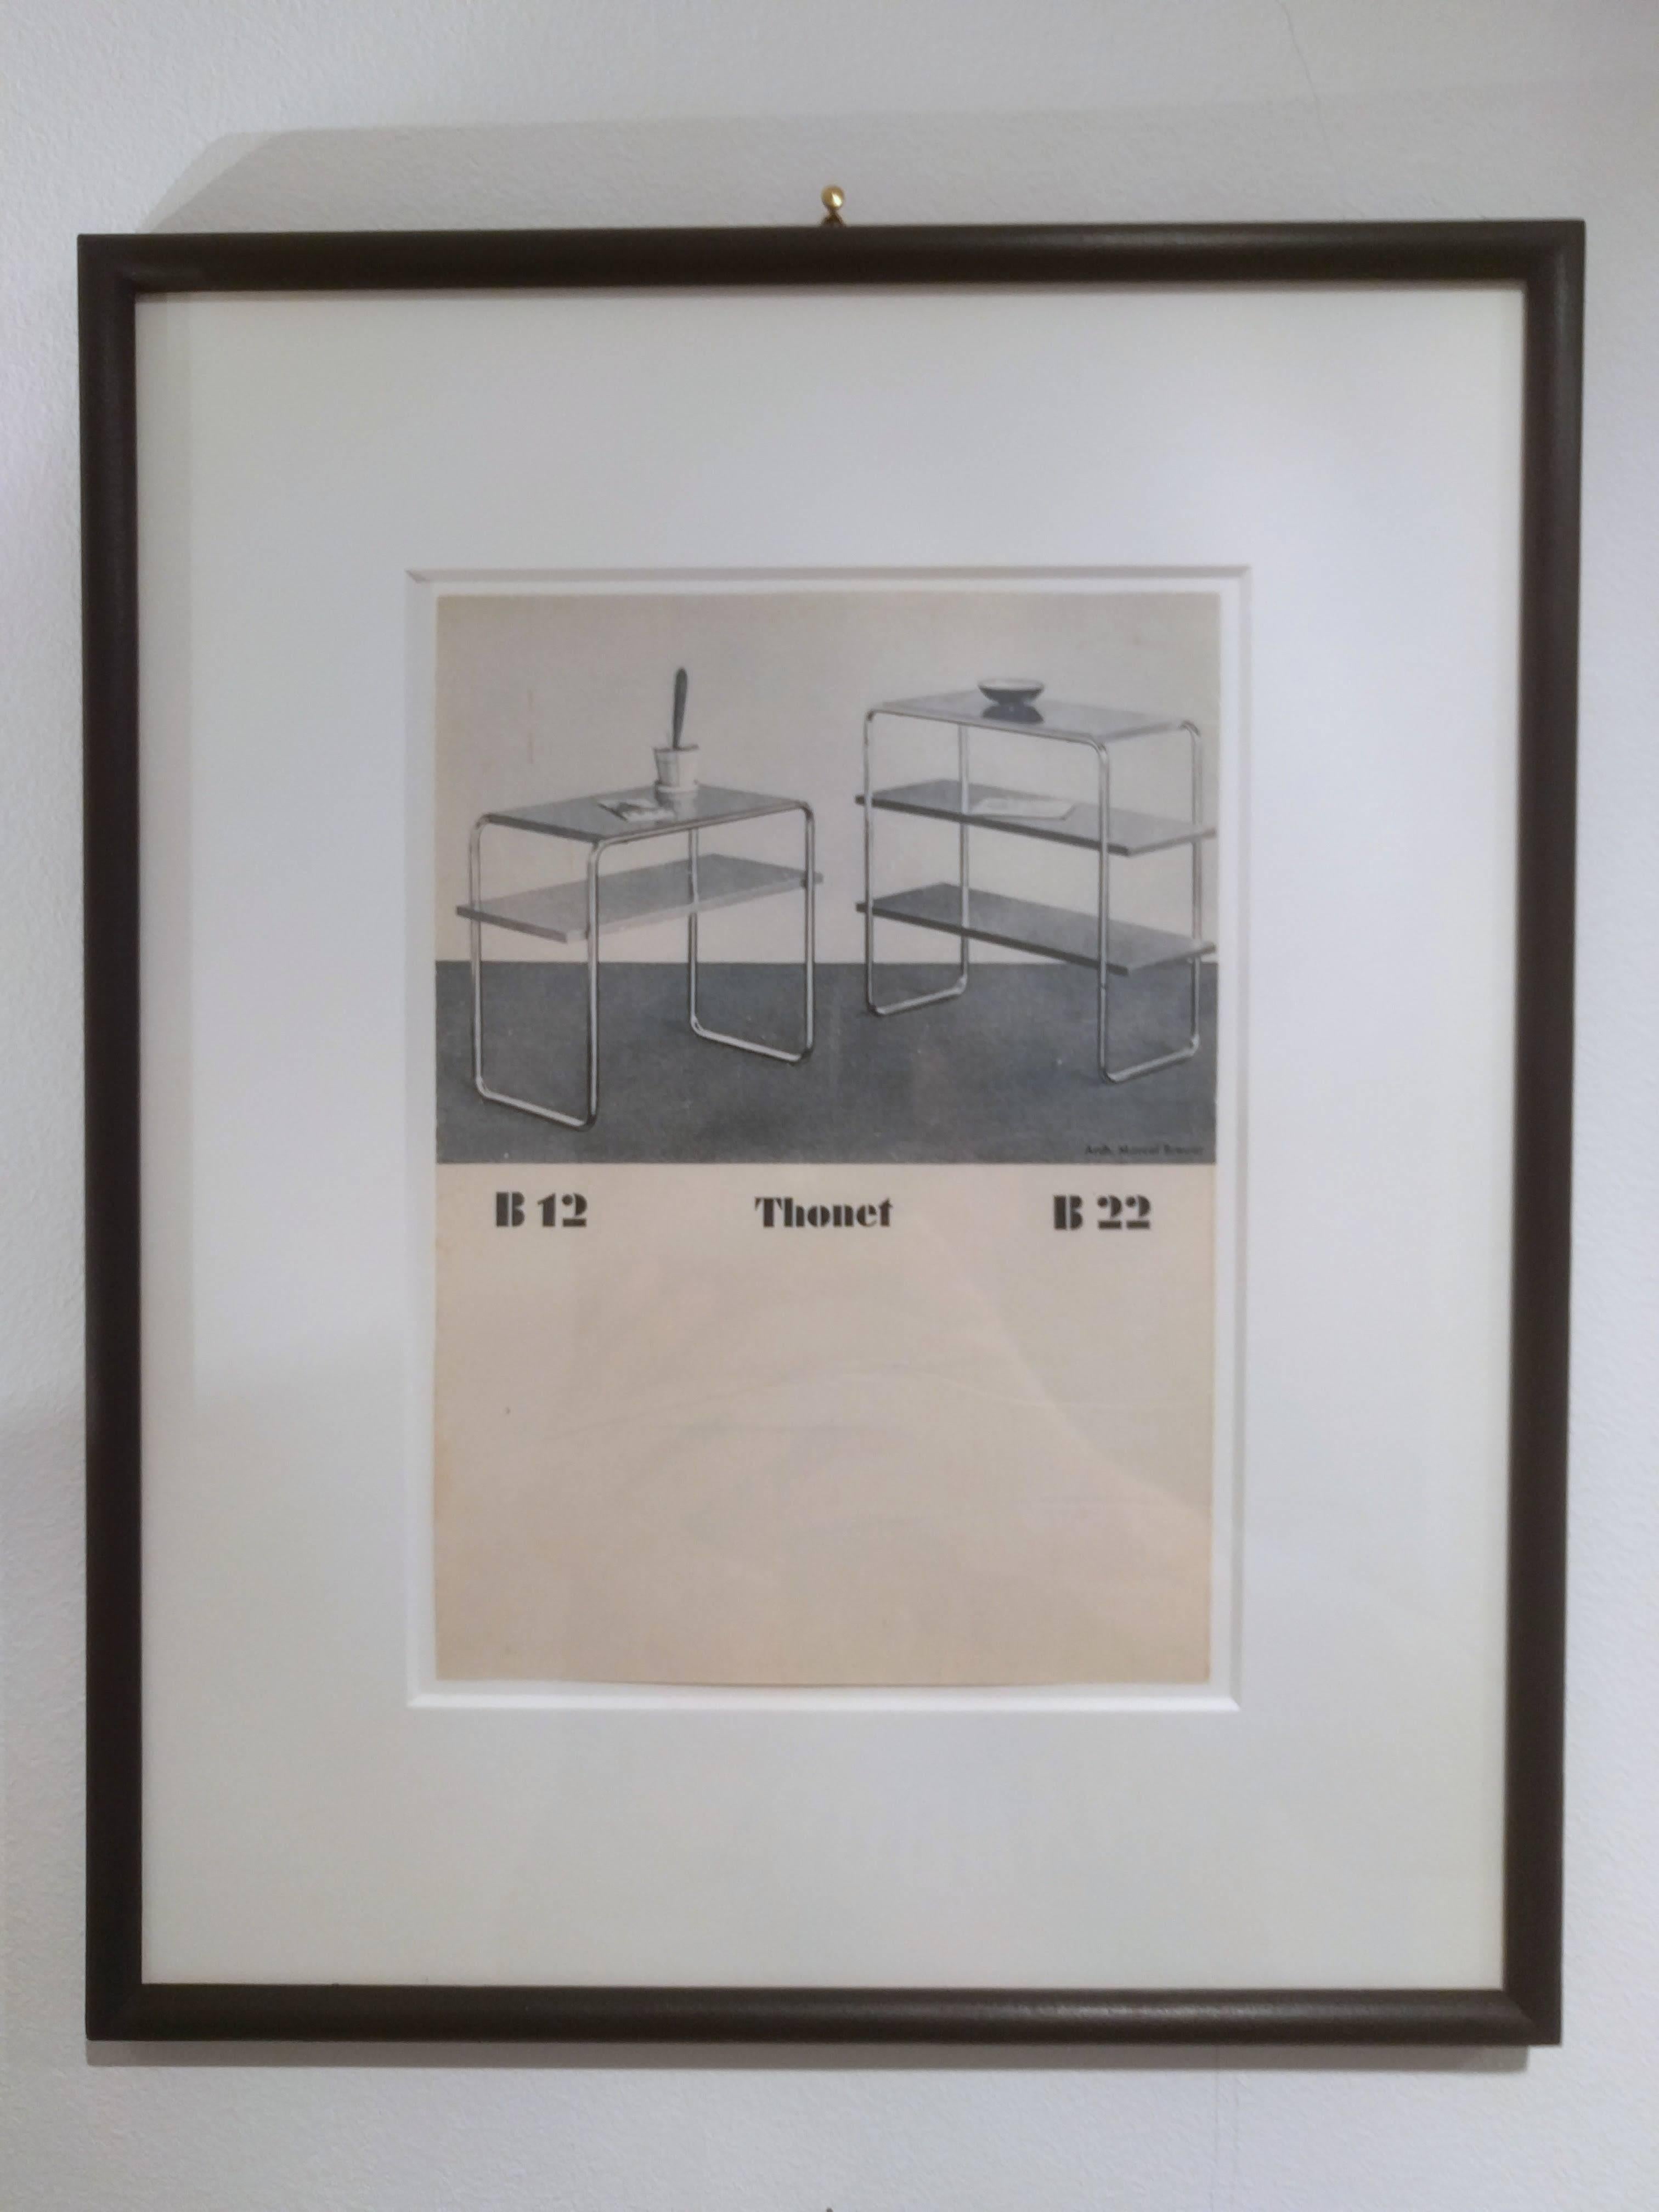 Framed cards from the Original Thonet Katalog Stahlrohrmöbel Bauhaus, Kurt Schmidt.
Each card is professionally framed.
Please ask for specific card whishes, more than 35 different cards available.
The very early version was printed on paper